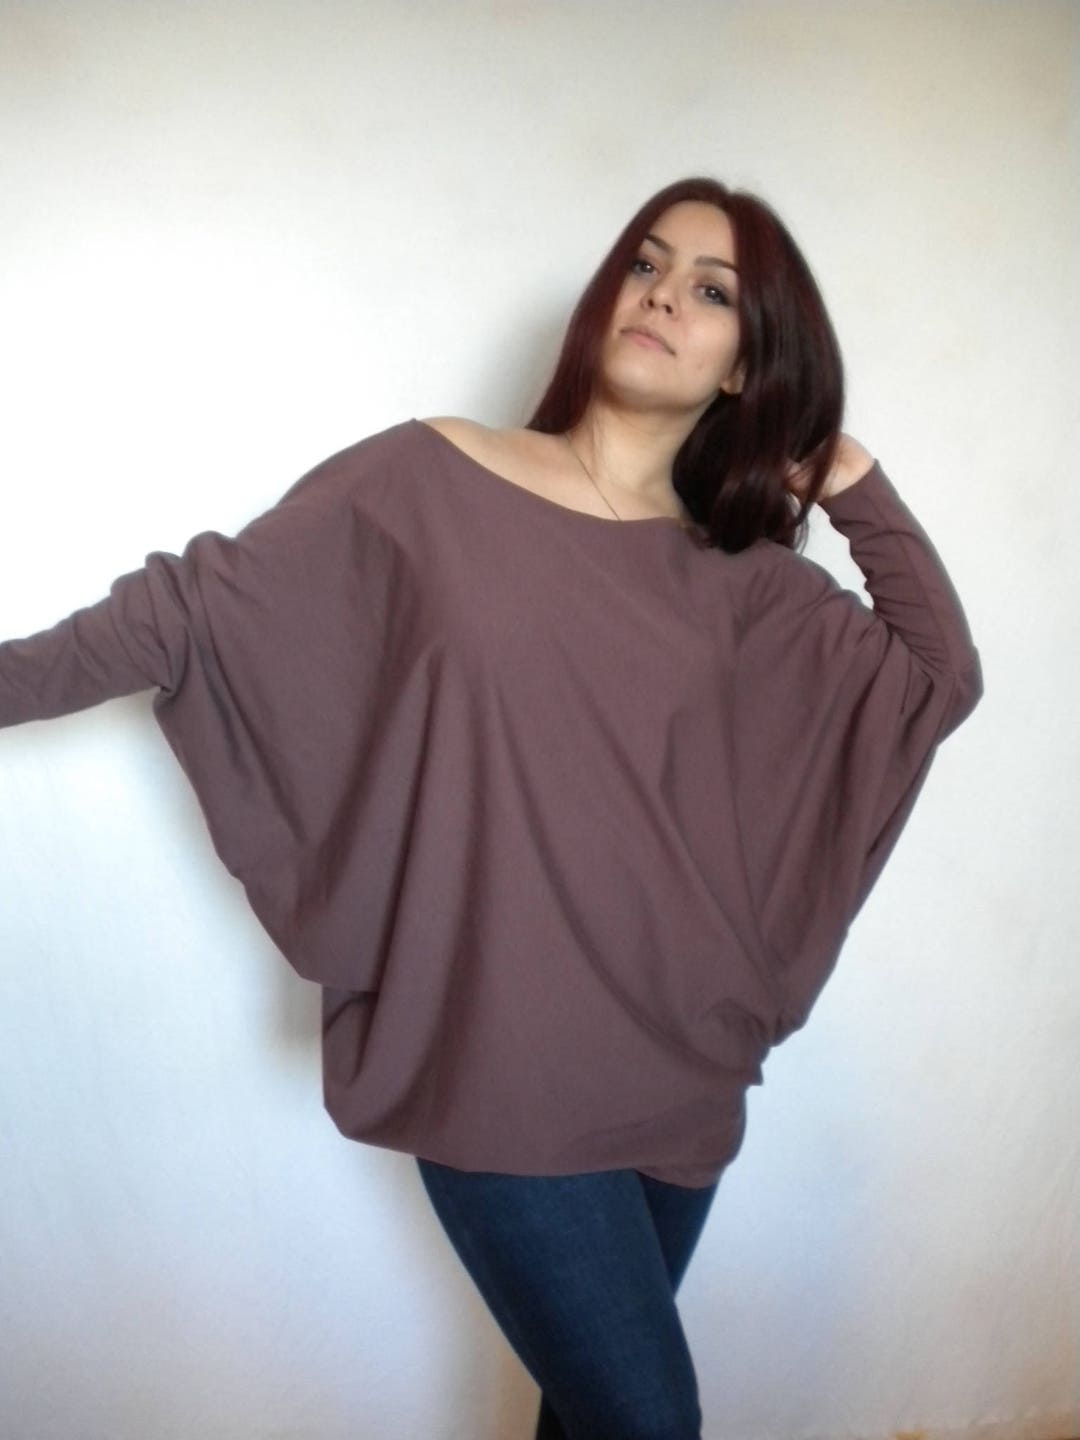 Plus Size off Shoulder Sweater Top, Loose Fitting Shirt, Long Batwing ...